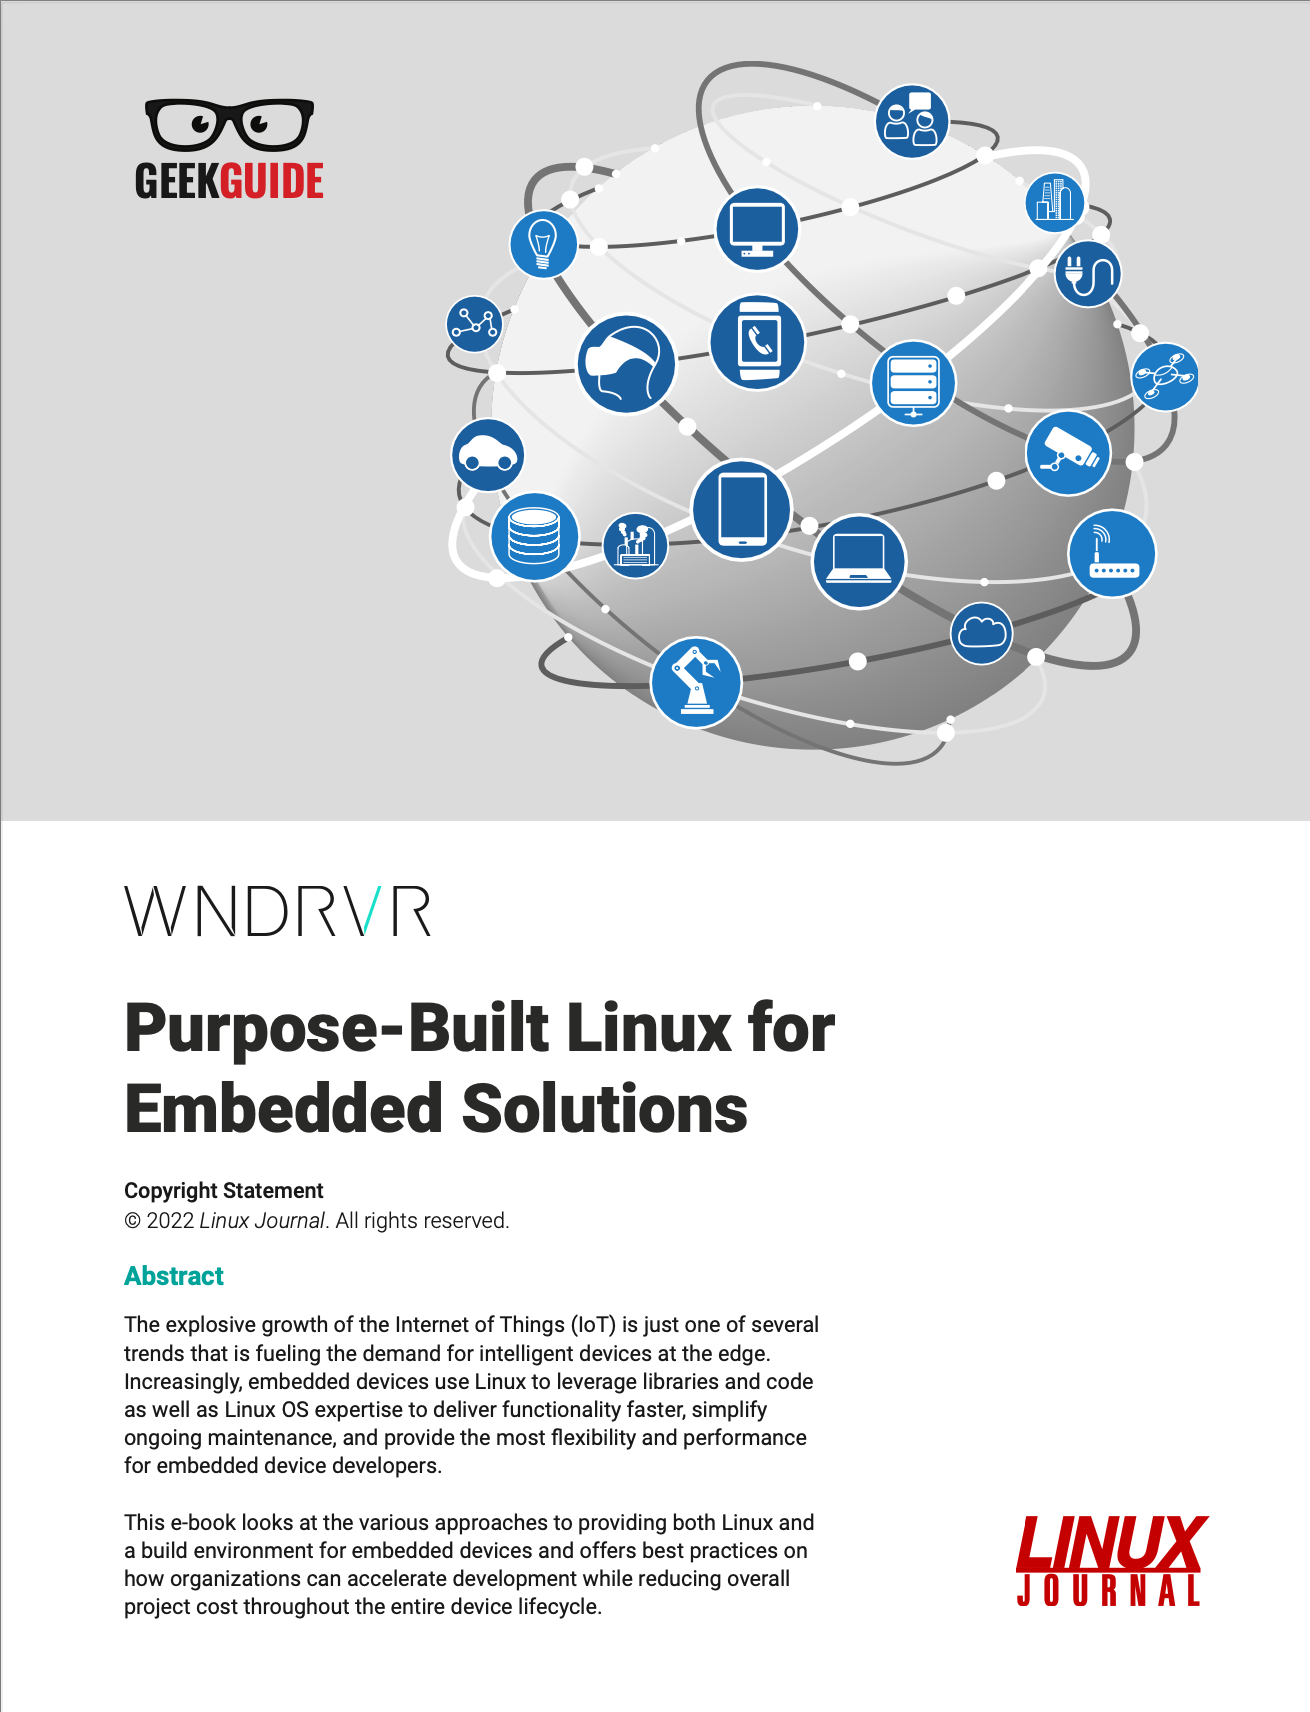 Purpose-Built Linux for Embedded Solutions